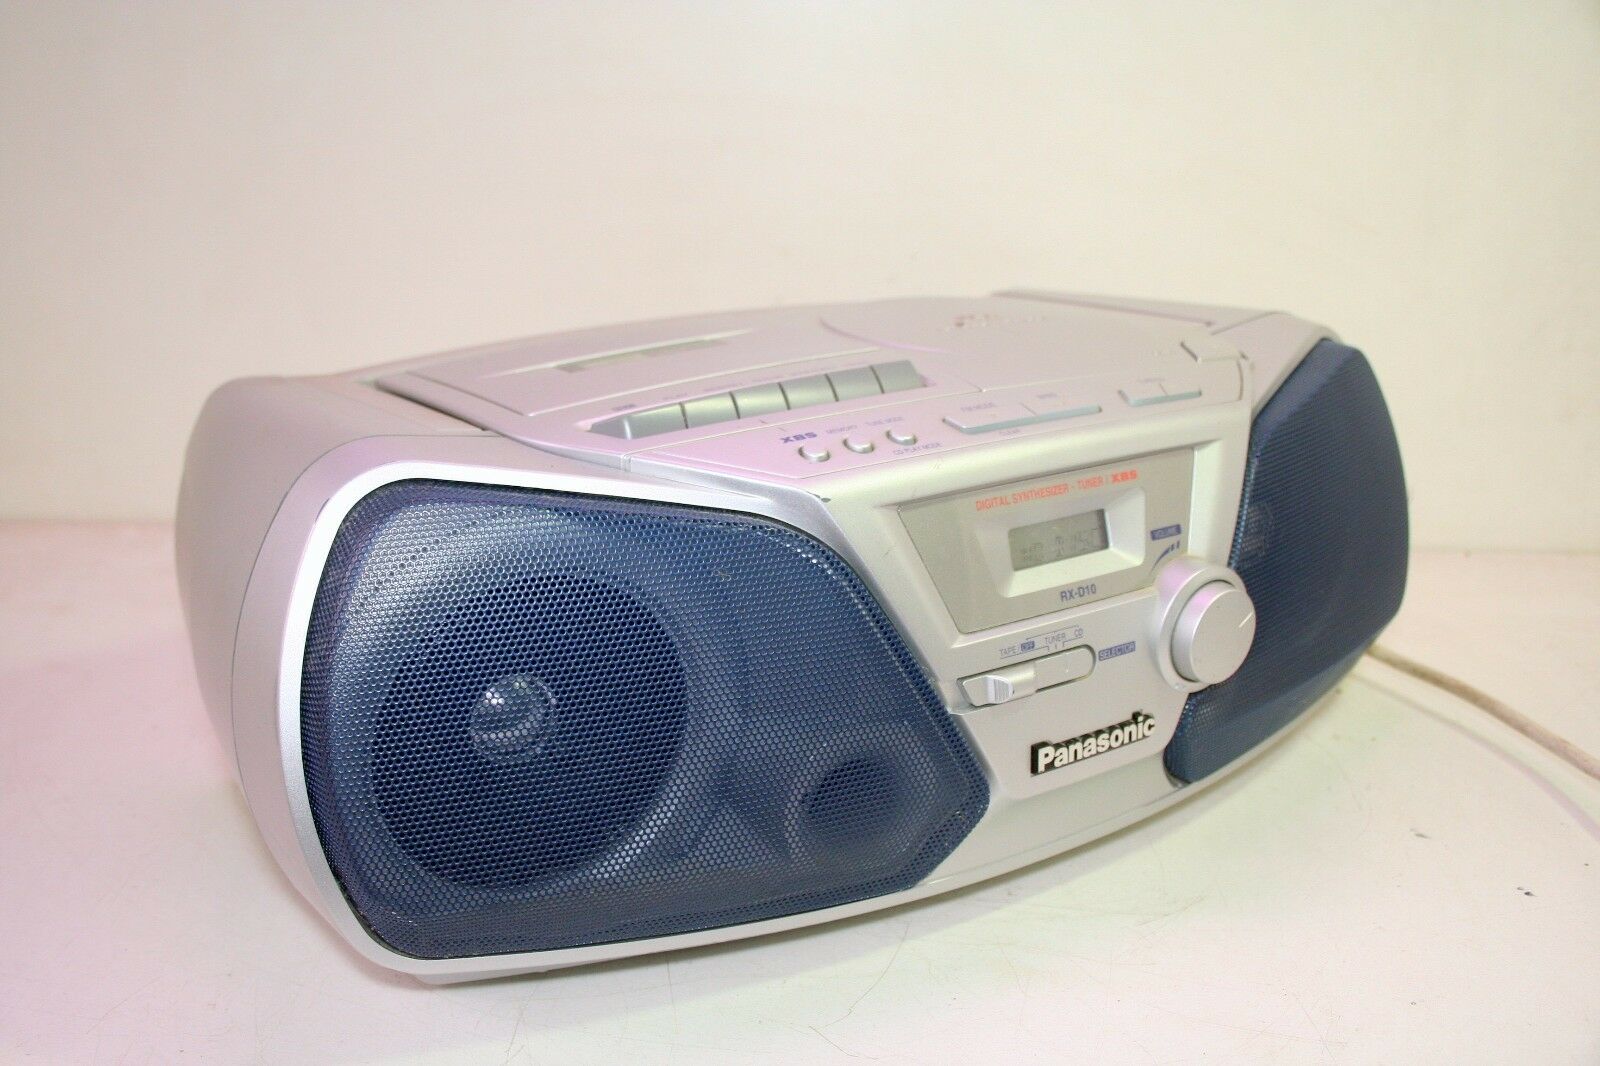 Panasonic RX-D10 Stereo Radio Tape and CD Player - Allsold.ca